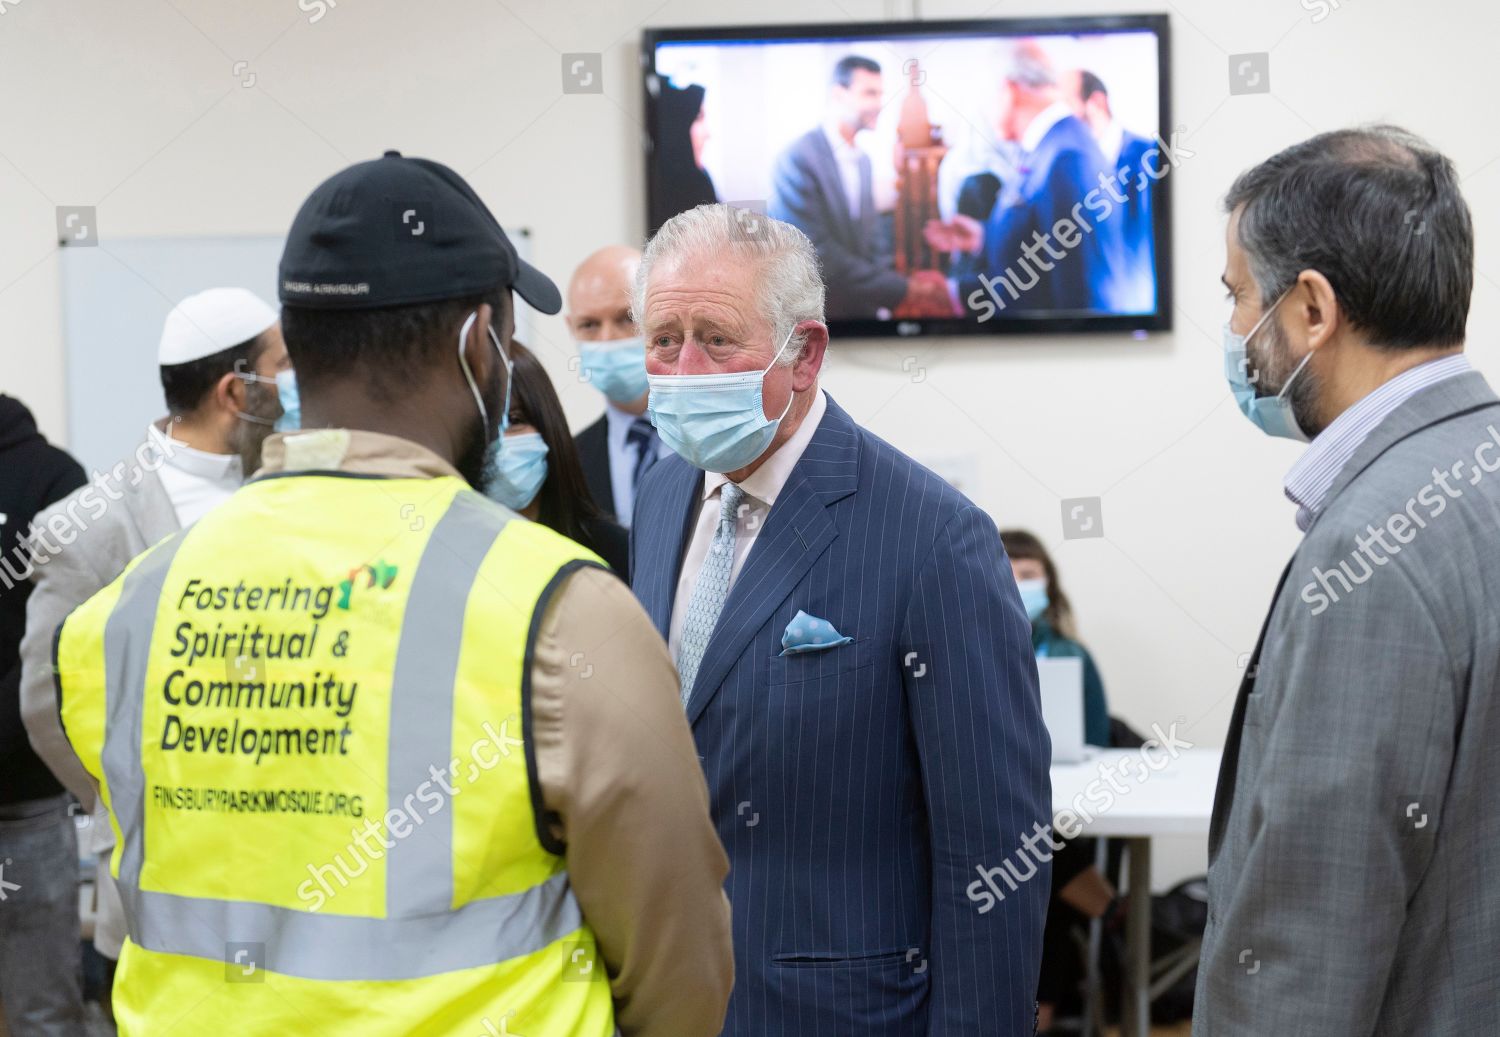 prince-charles-and-camilla-duchess-of-cornwall-visit-vaccination-pop-up-centre-at-finsbury-park-mosque-london-uk-shutterstock-editorial-11802378al.jpg